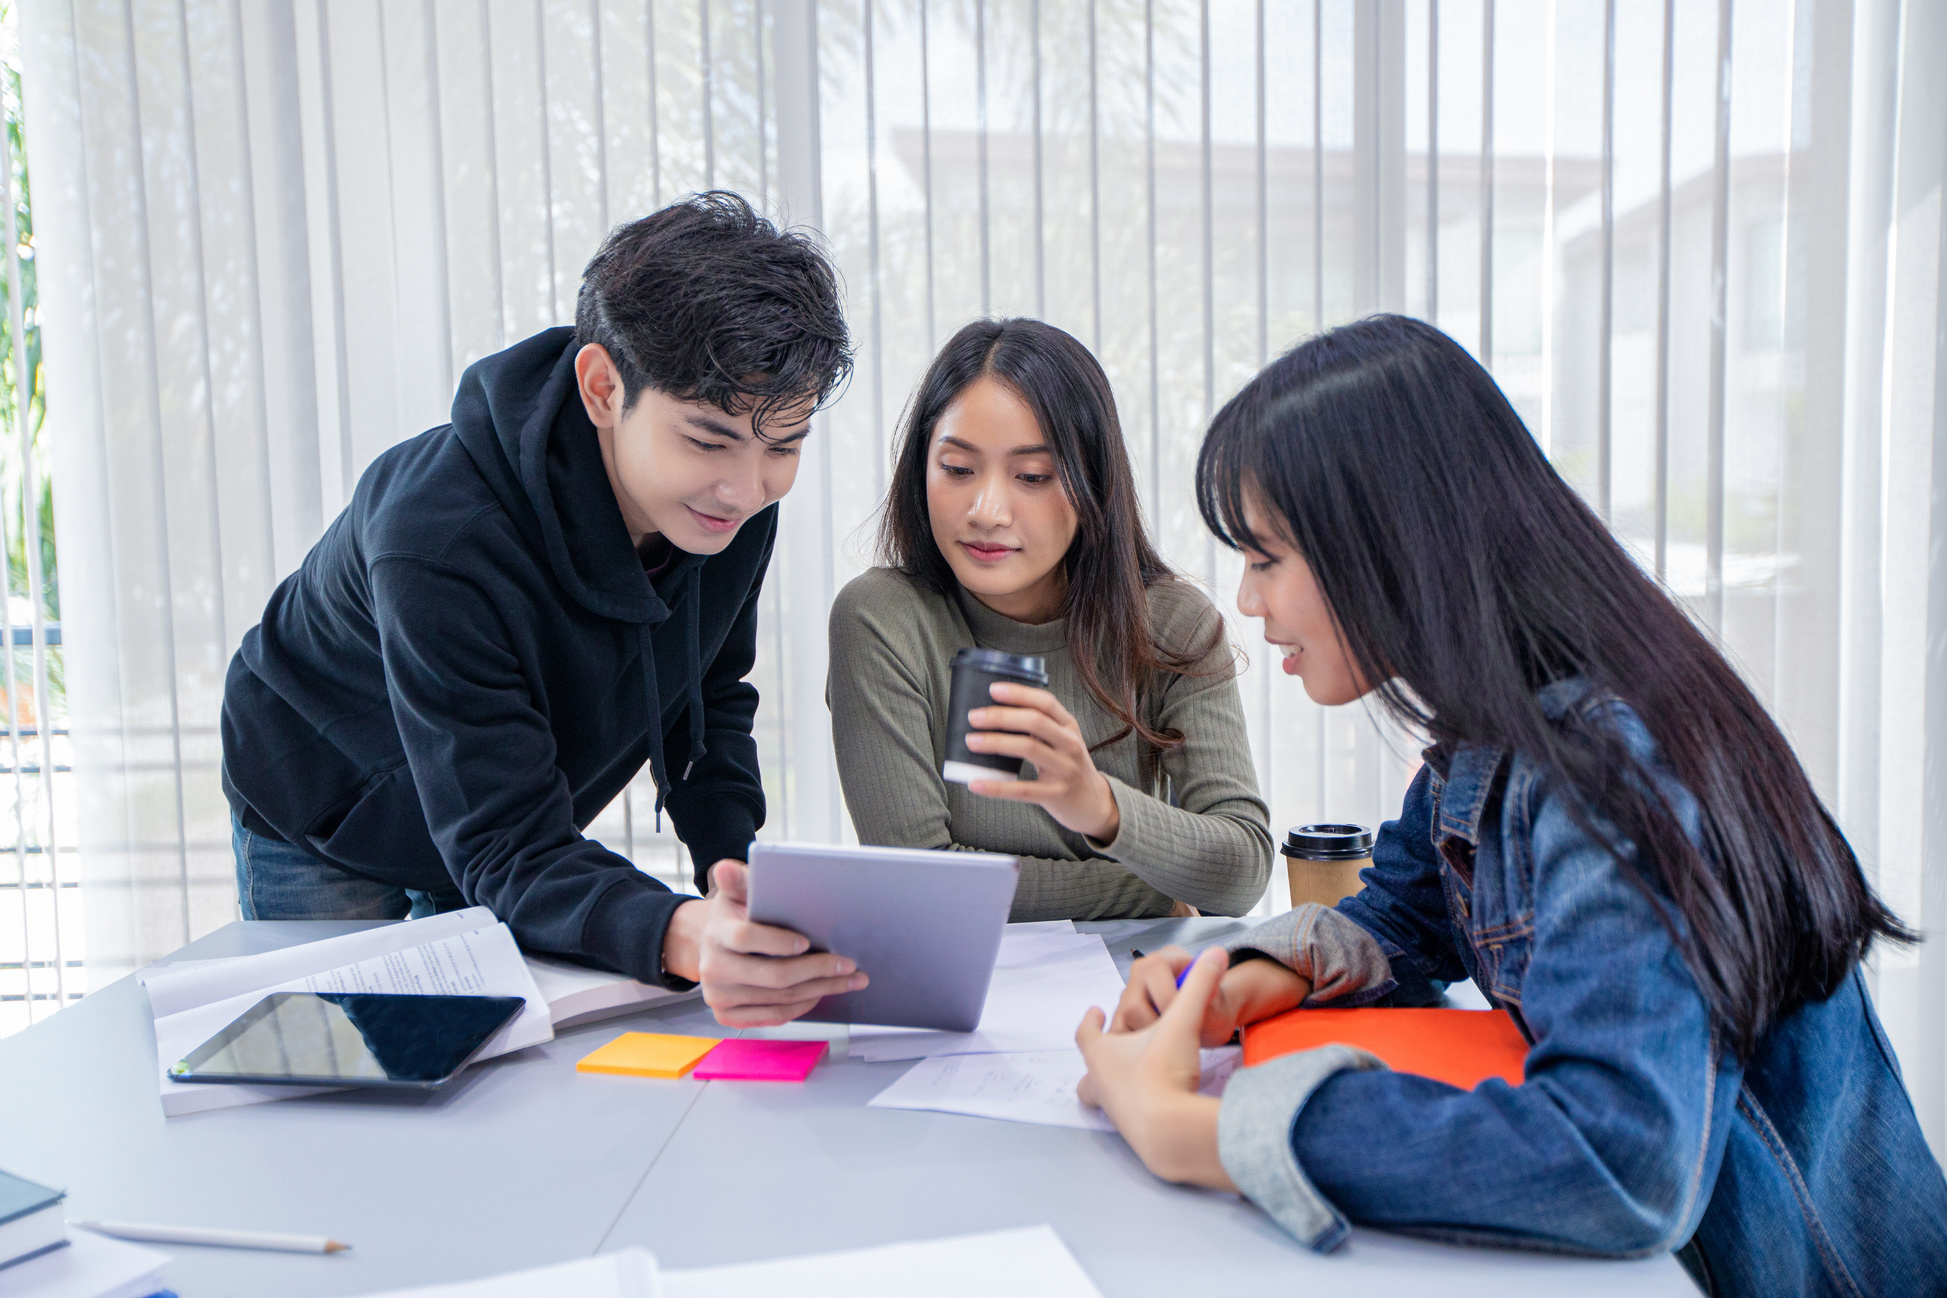 Group of Asian College Students Studying Together